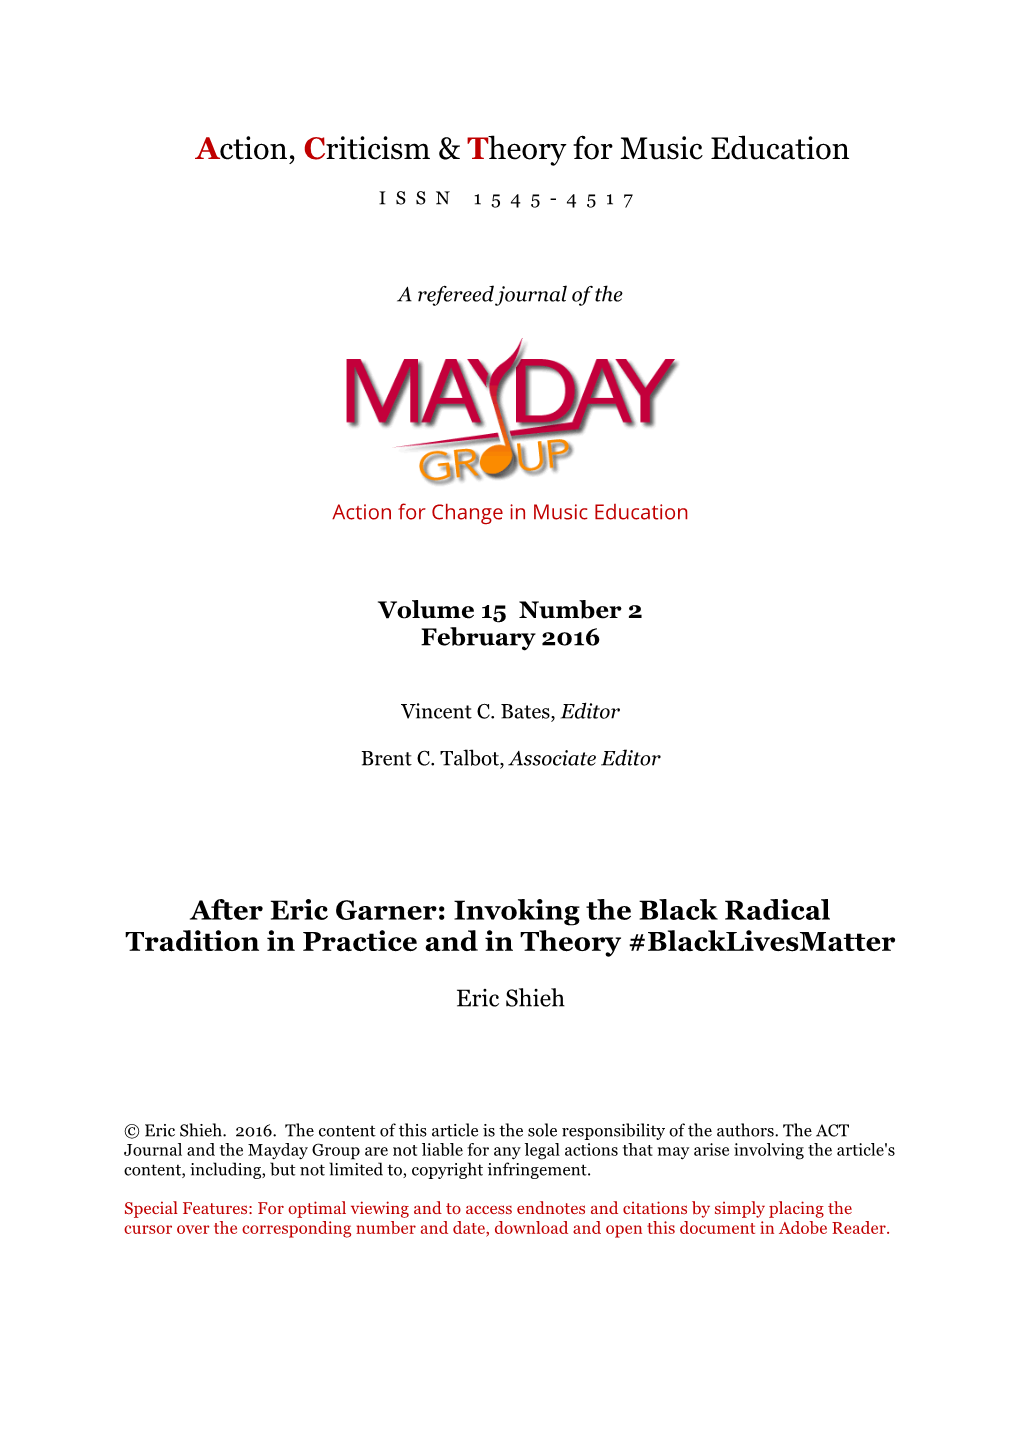 After Eric Garner: Invoking the Black Radical Tradition in Practice and in Theory #Blacklivesmatter